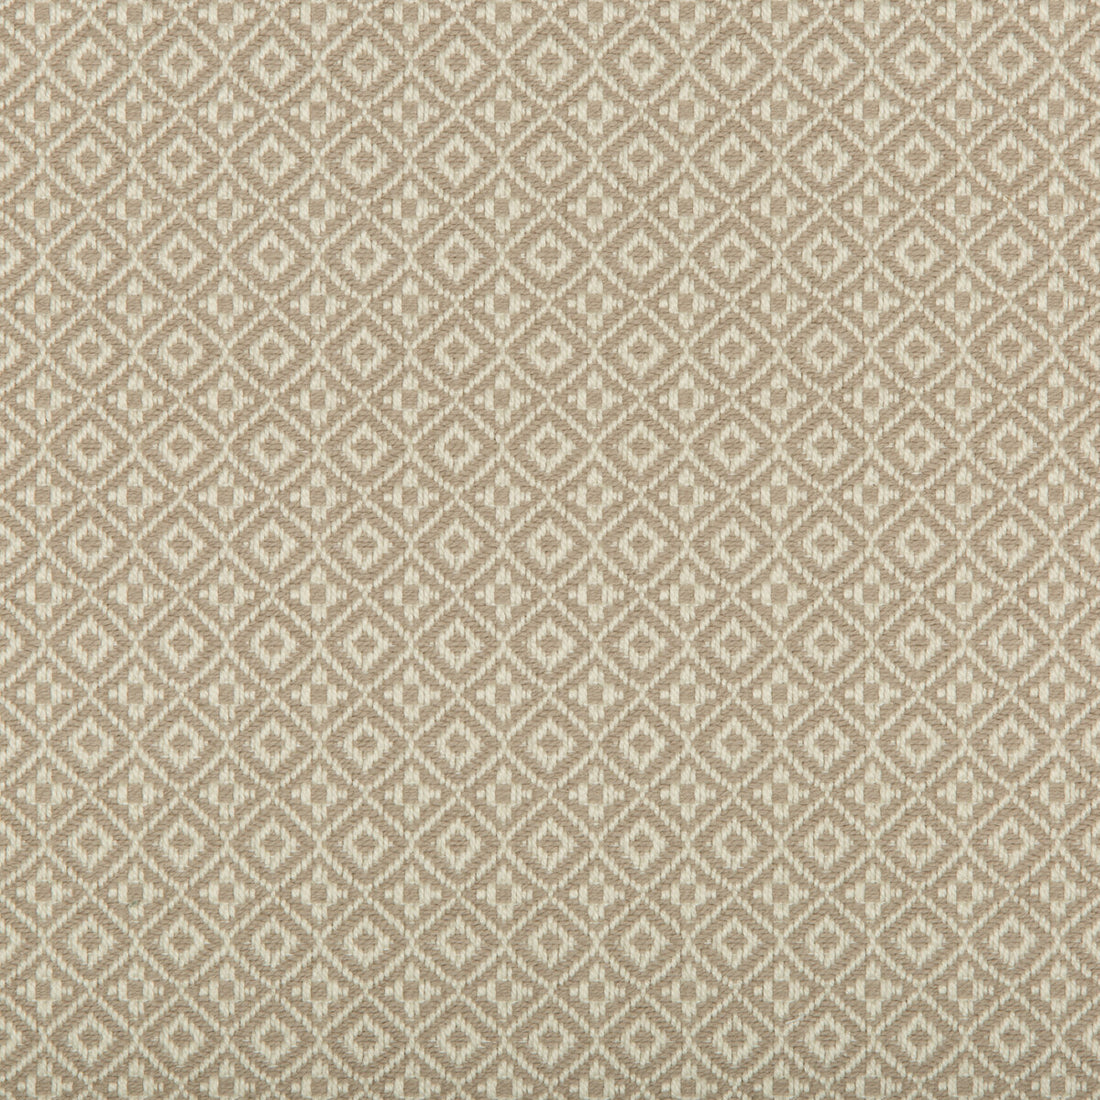 Attribute Grid fabric in papyrus color - pattern 35403.16.0 - by Kravet Design in the Nate Berkus Well-Traveled collection